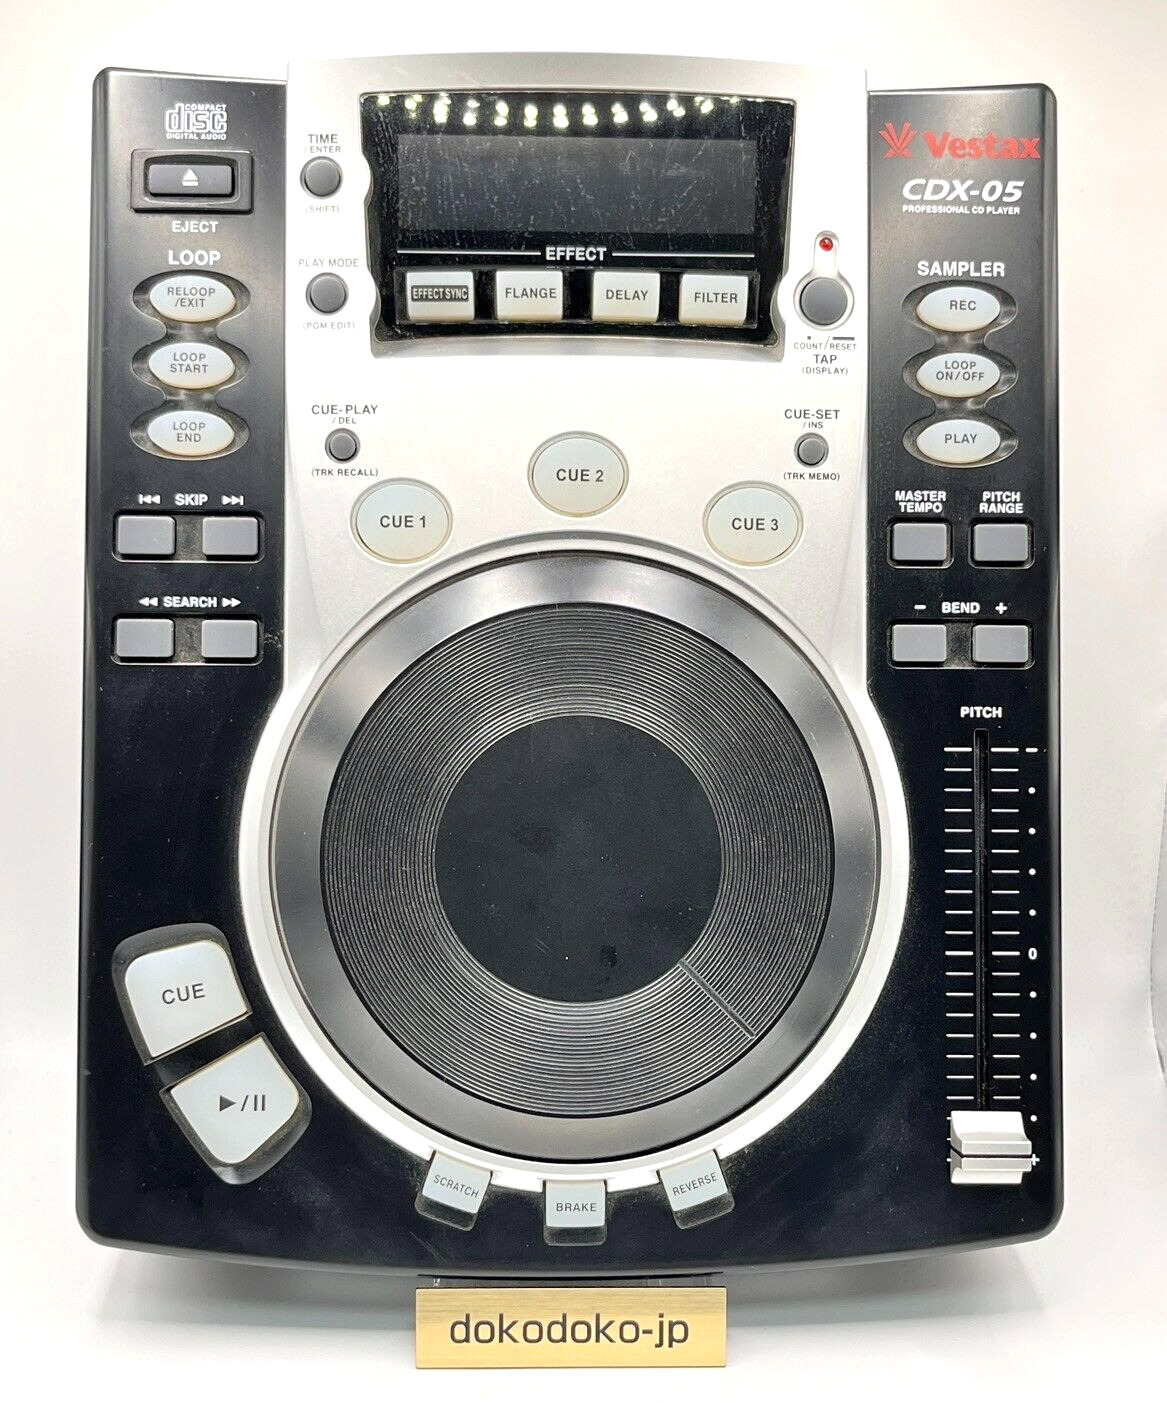 Vestax CDX-05 Professional Turntable Mixing CD Player from Japan